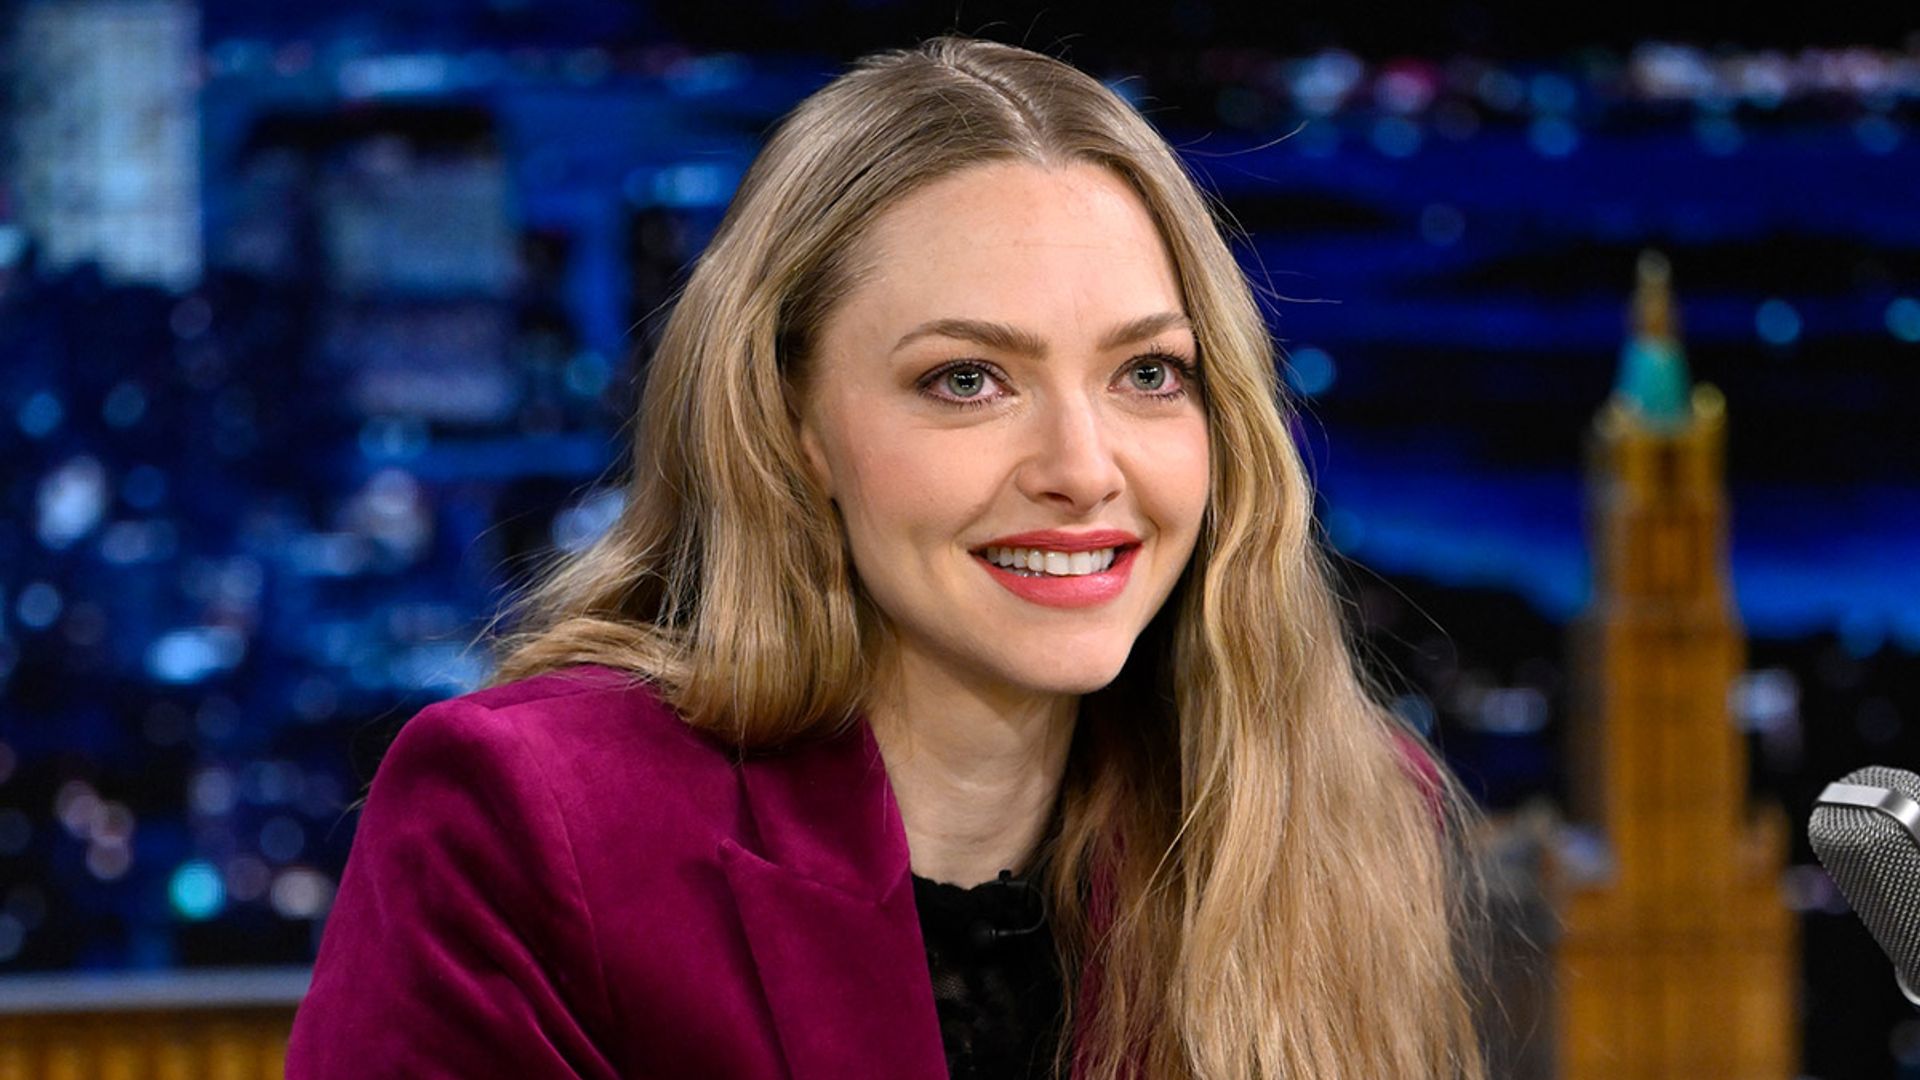 Amanda Seyfried's legs go on forever in gorgeous outfit – see photo